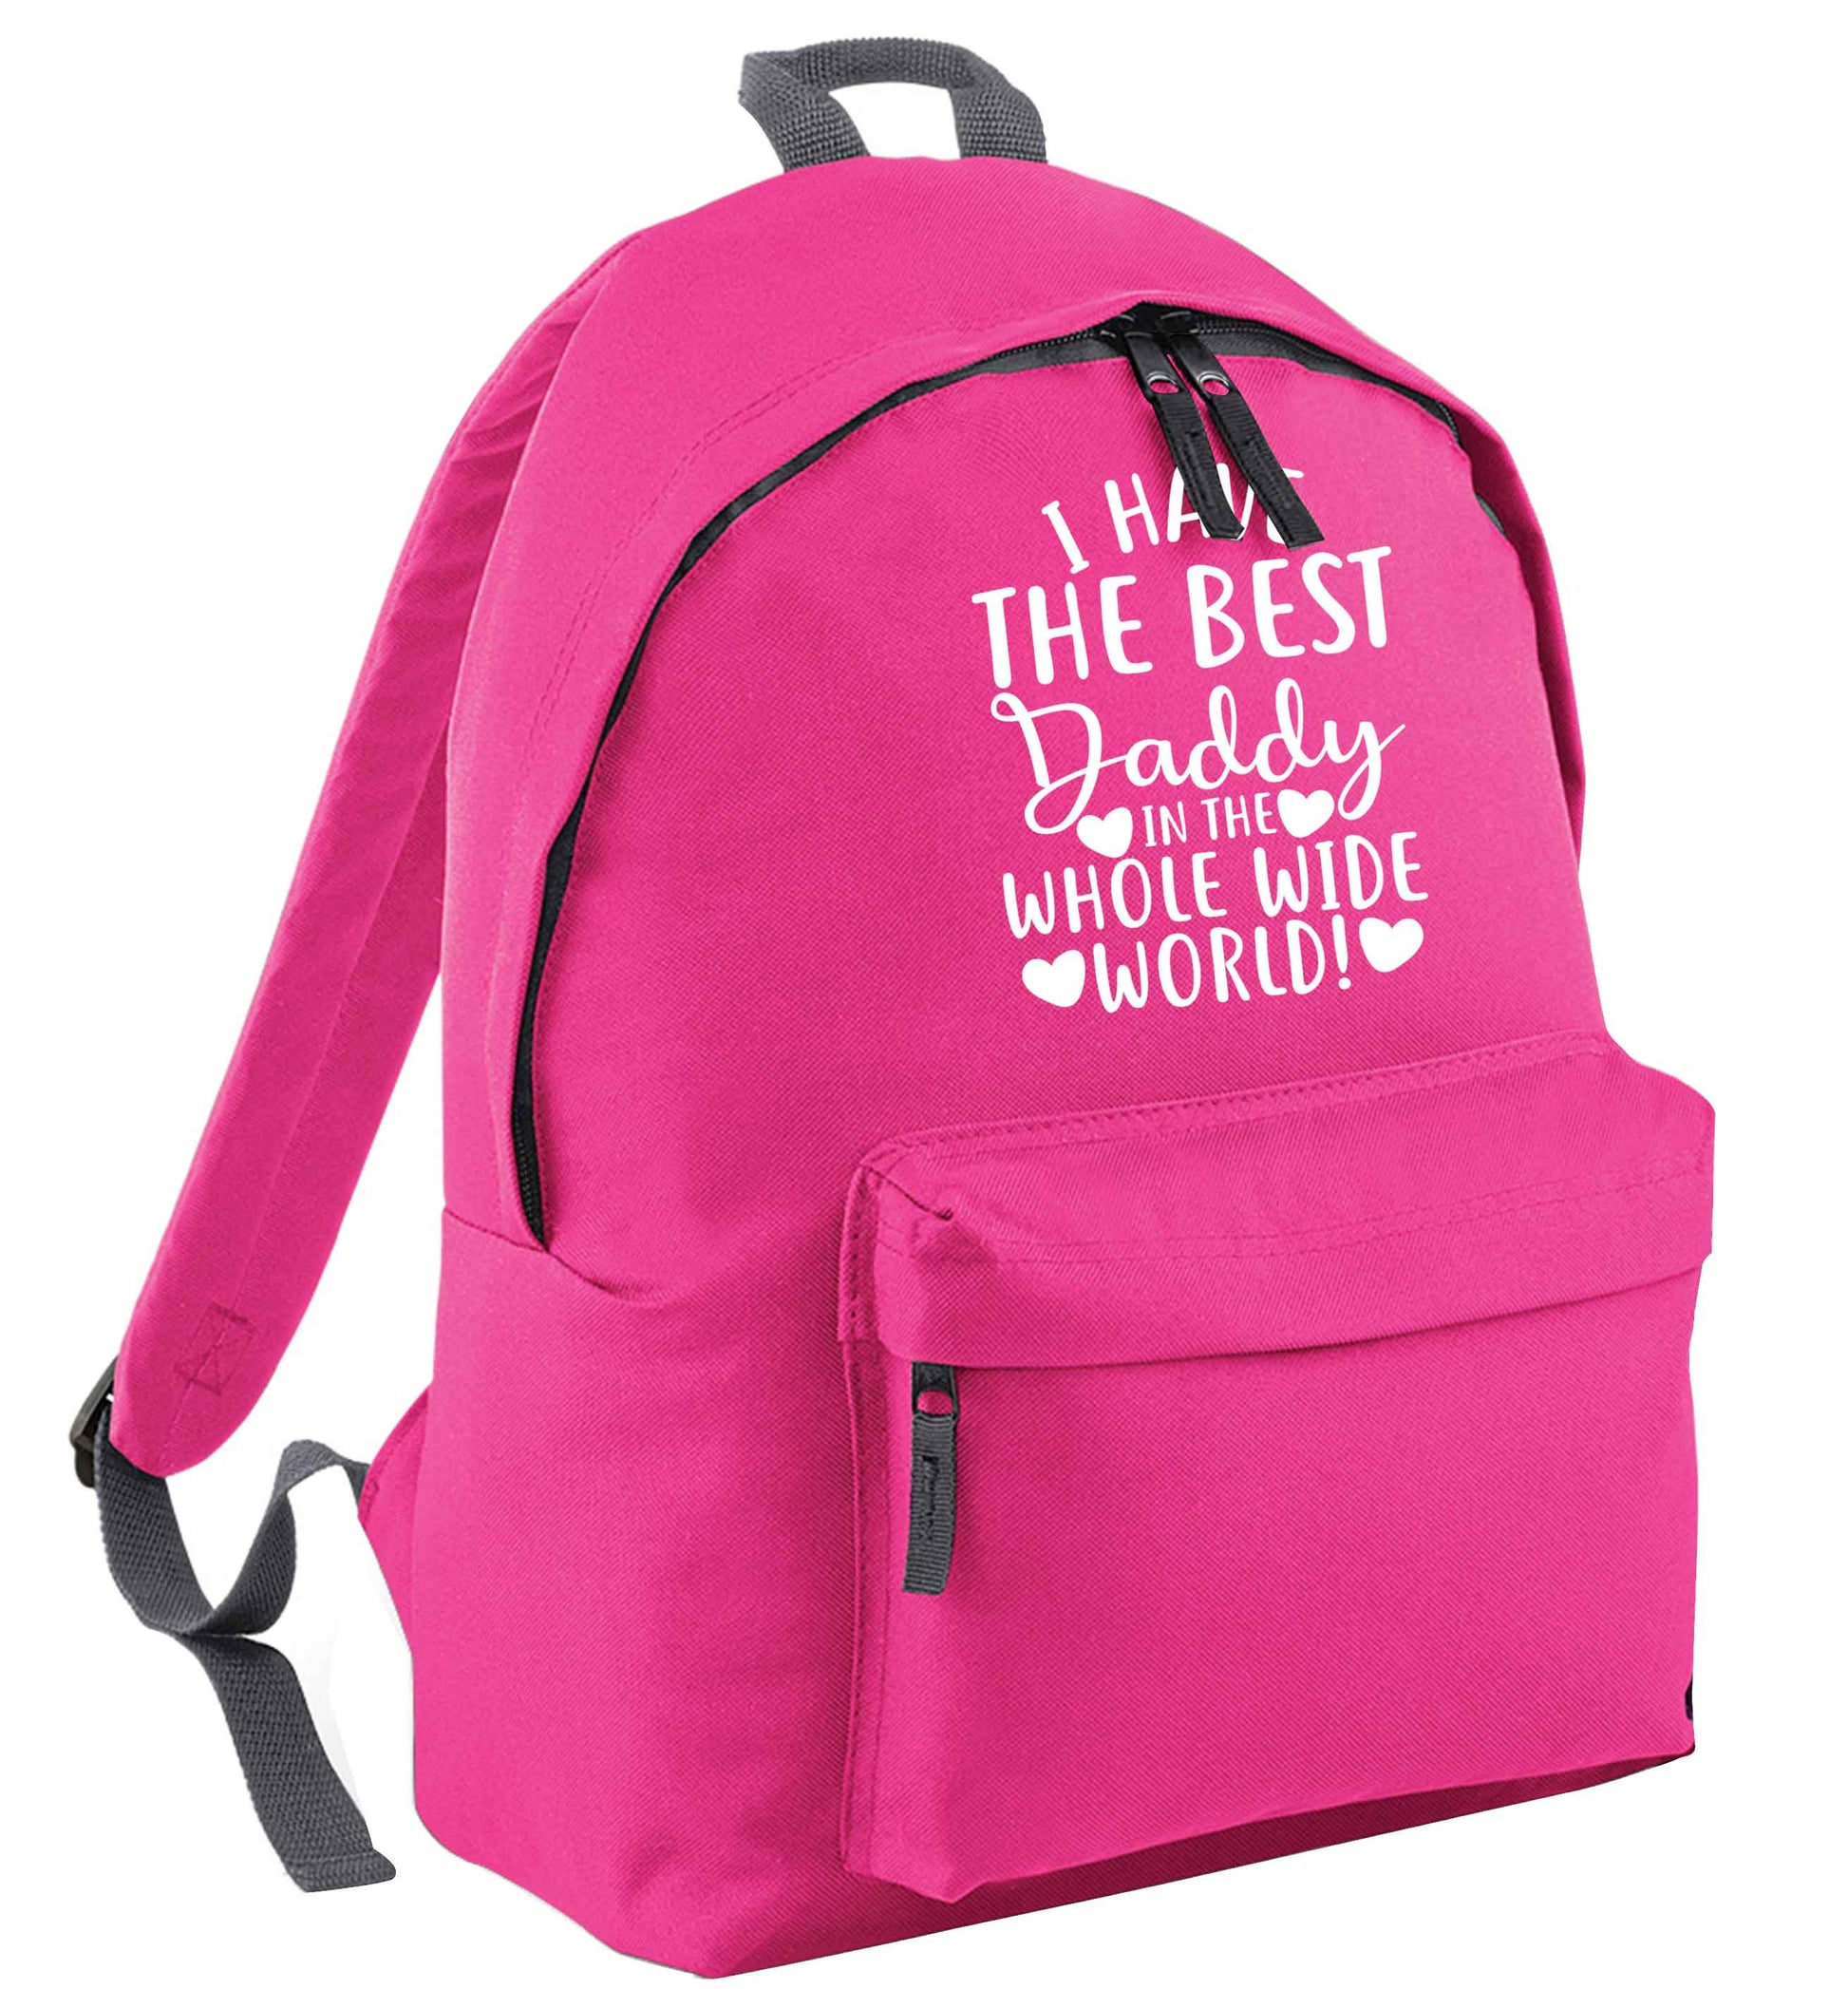 I have the best daddy in the whole wide world | Children's backpack